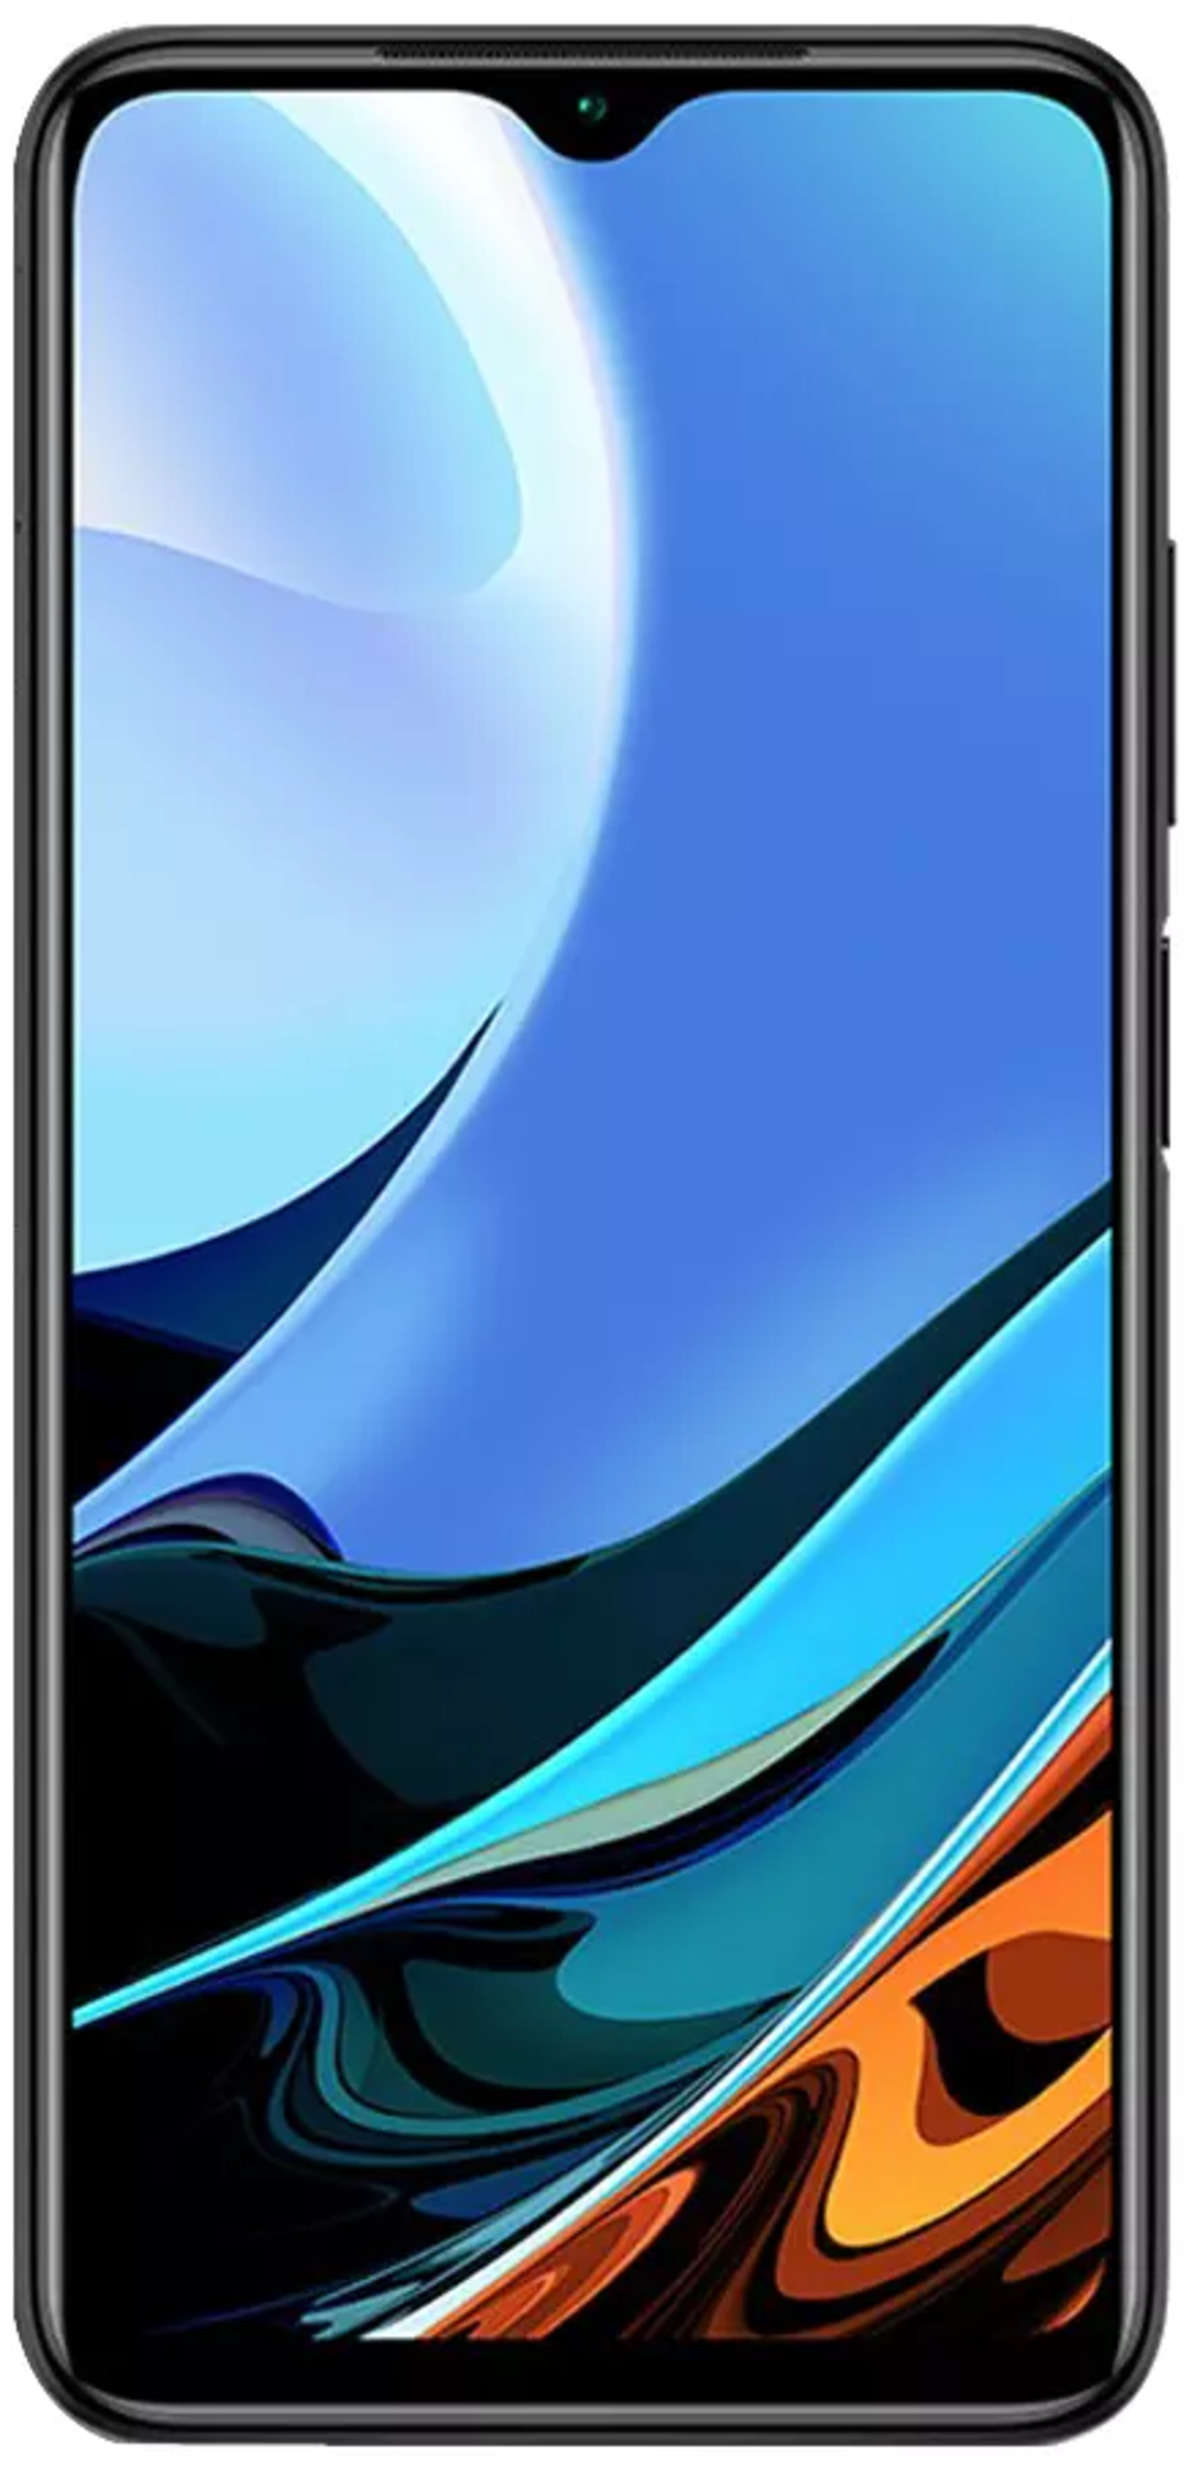 Redmi 9 Power 128gb 4gb Ram Price In India Full Specifications 5th Nov 22 At Gadgets Now